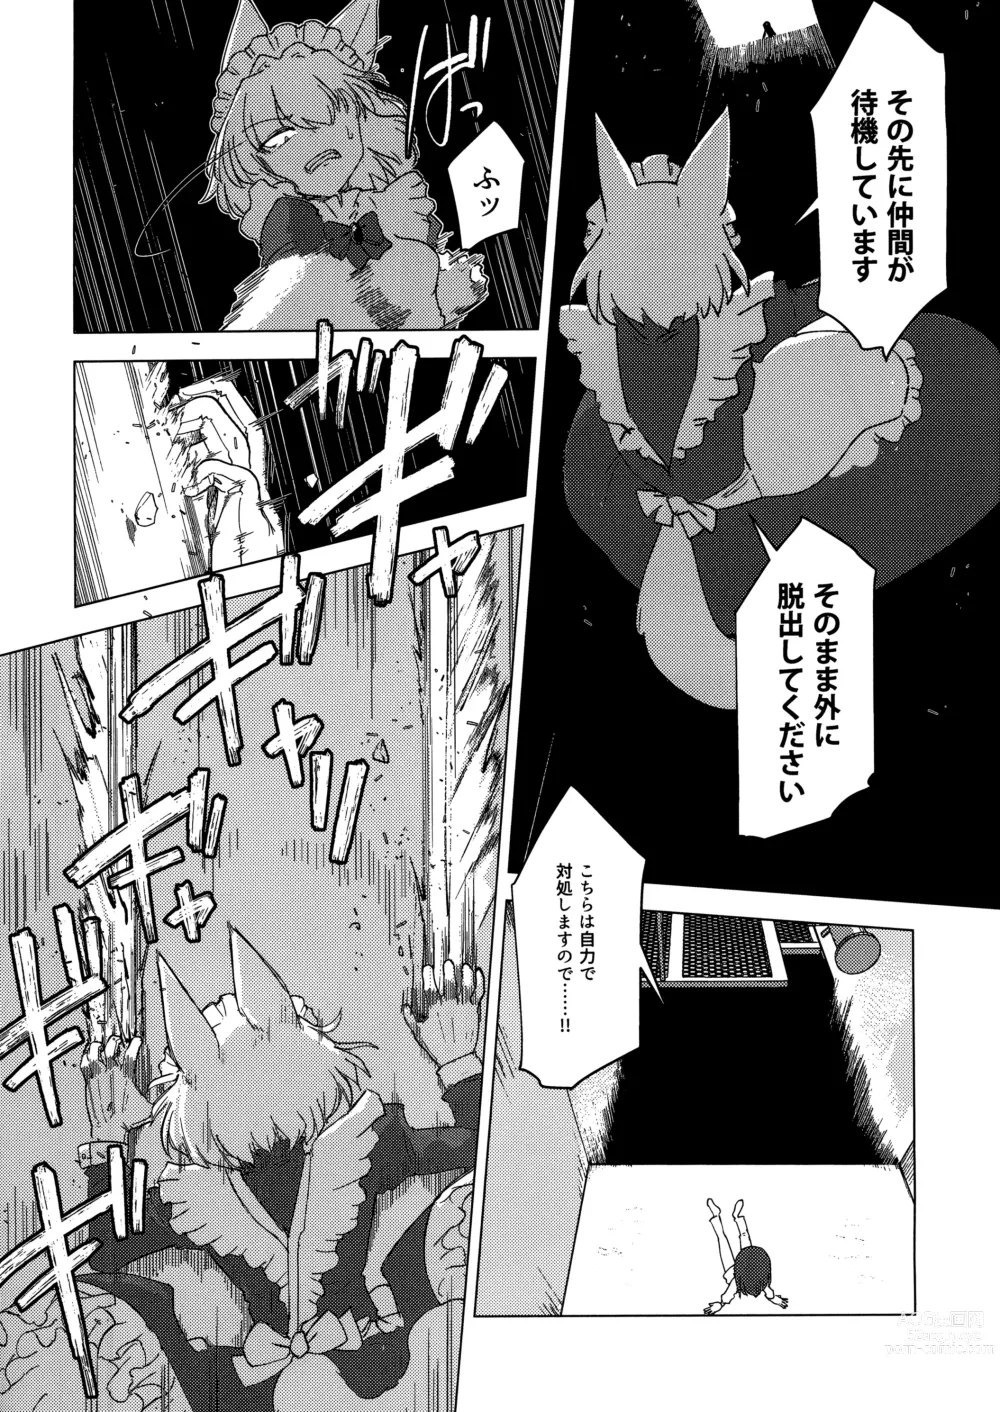 Page 7 of doujinshi Wolf in sheeps clothing in Tentacles